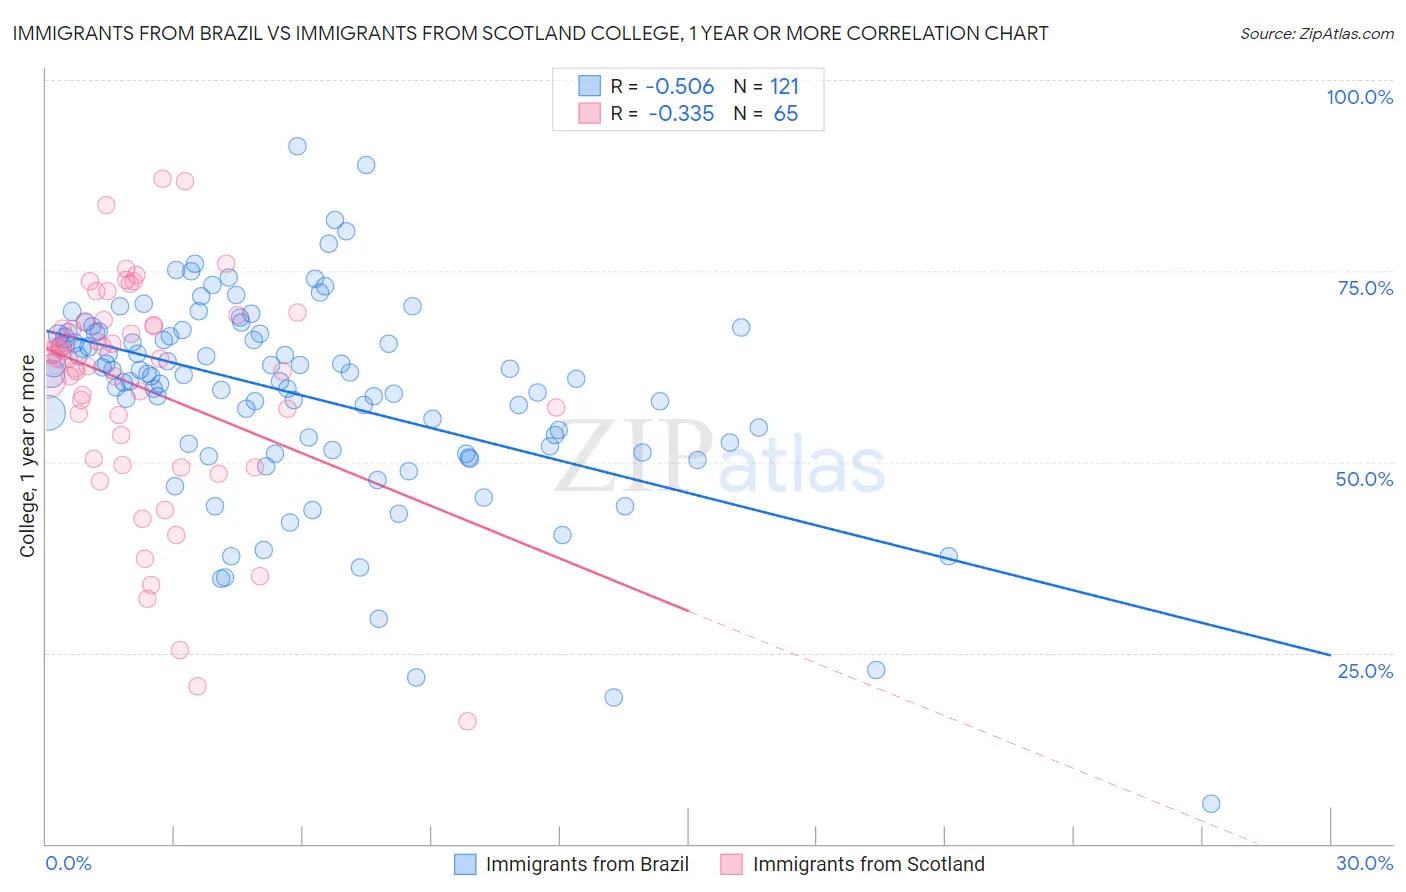 Immigrants from Brazil vs Immigrants from Scotland College, 1 year or more